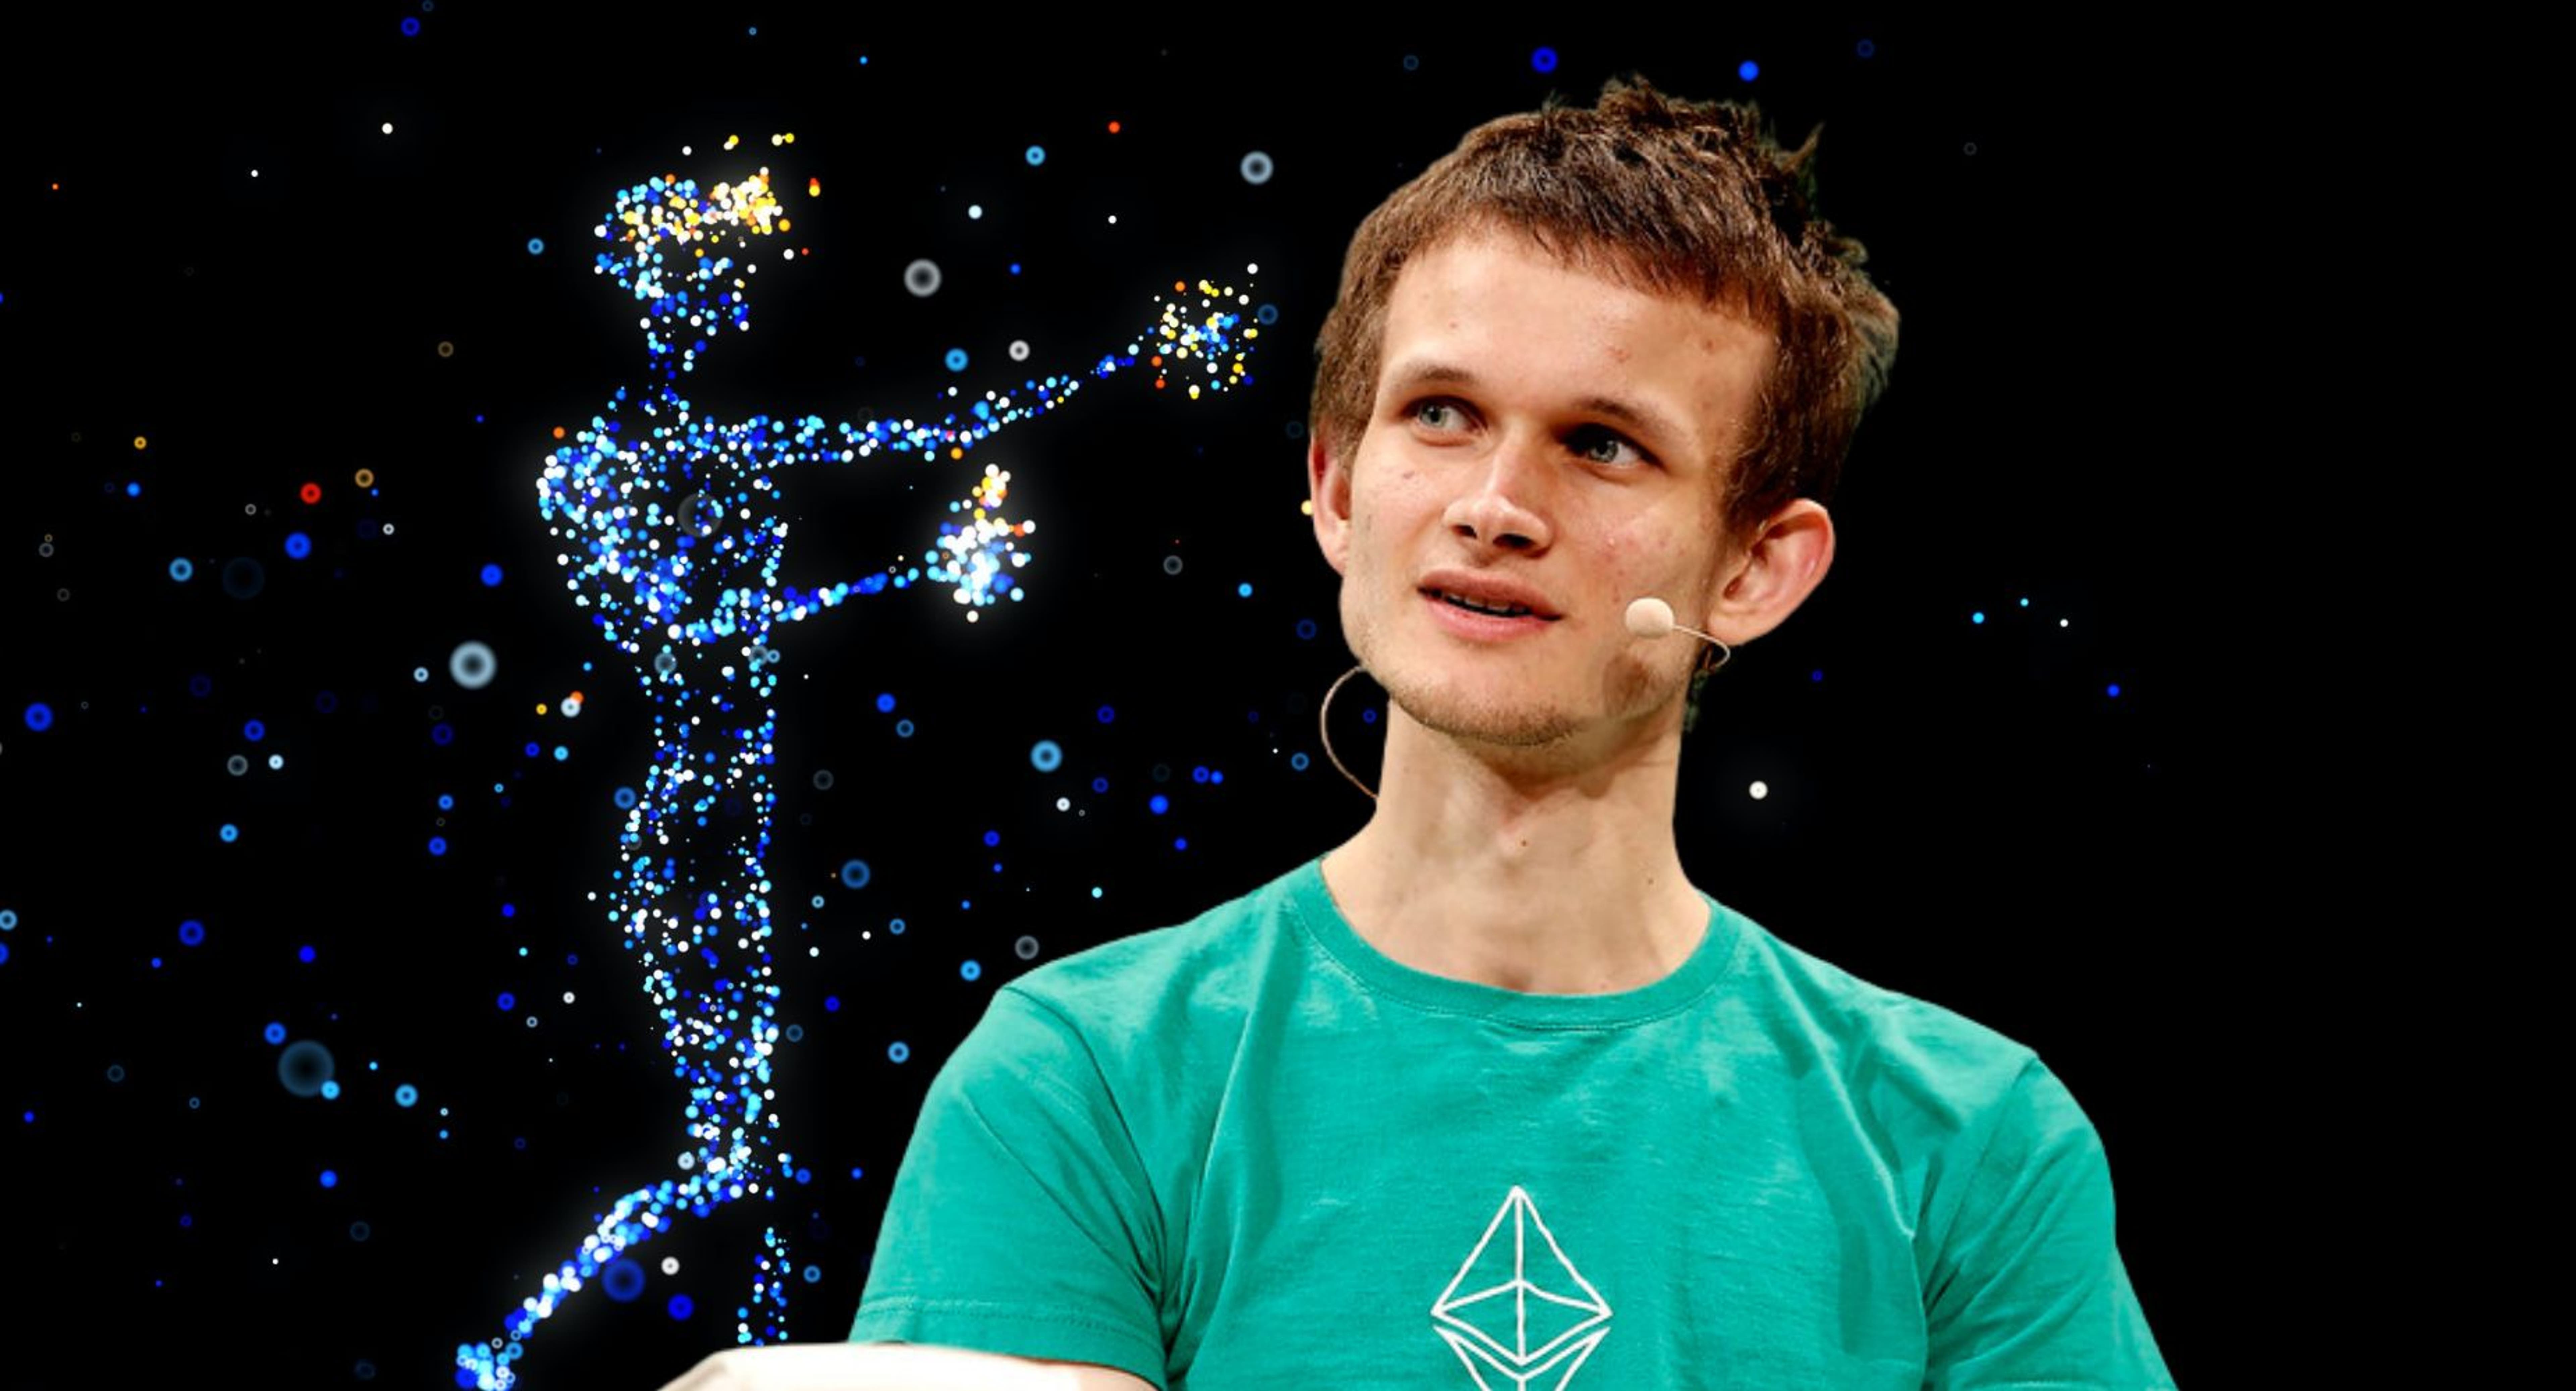 Why Ethereum&#39;s Vitalik Buterin Says Corporate Metaverse Efforts Will Fail: &#39;Anything Facebook Creates Now Will Misfire&#39;